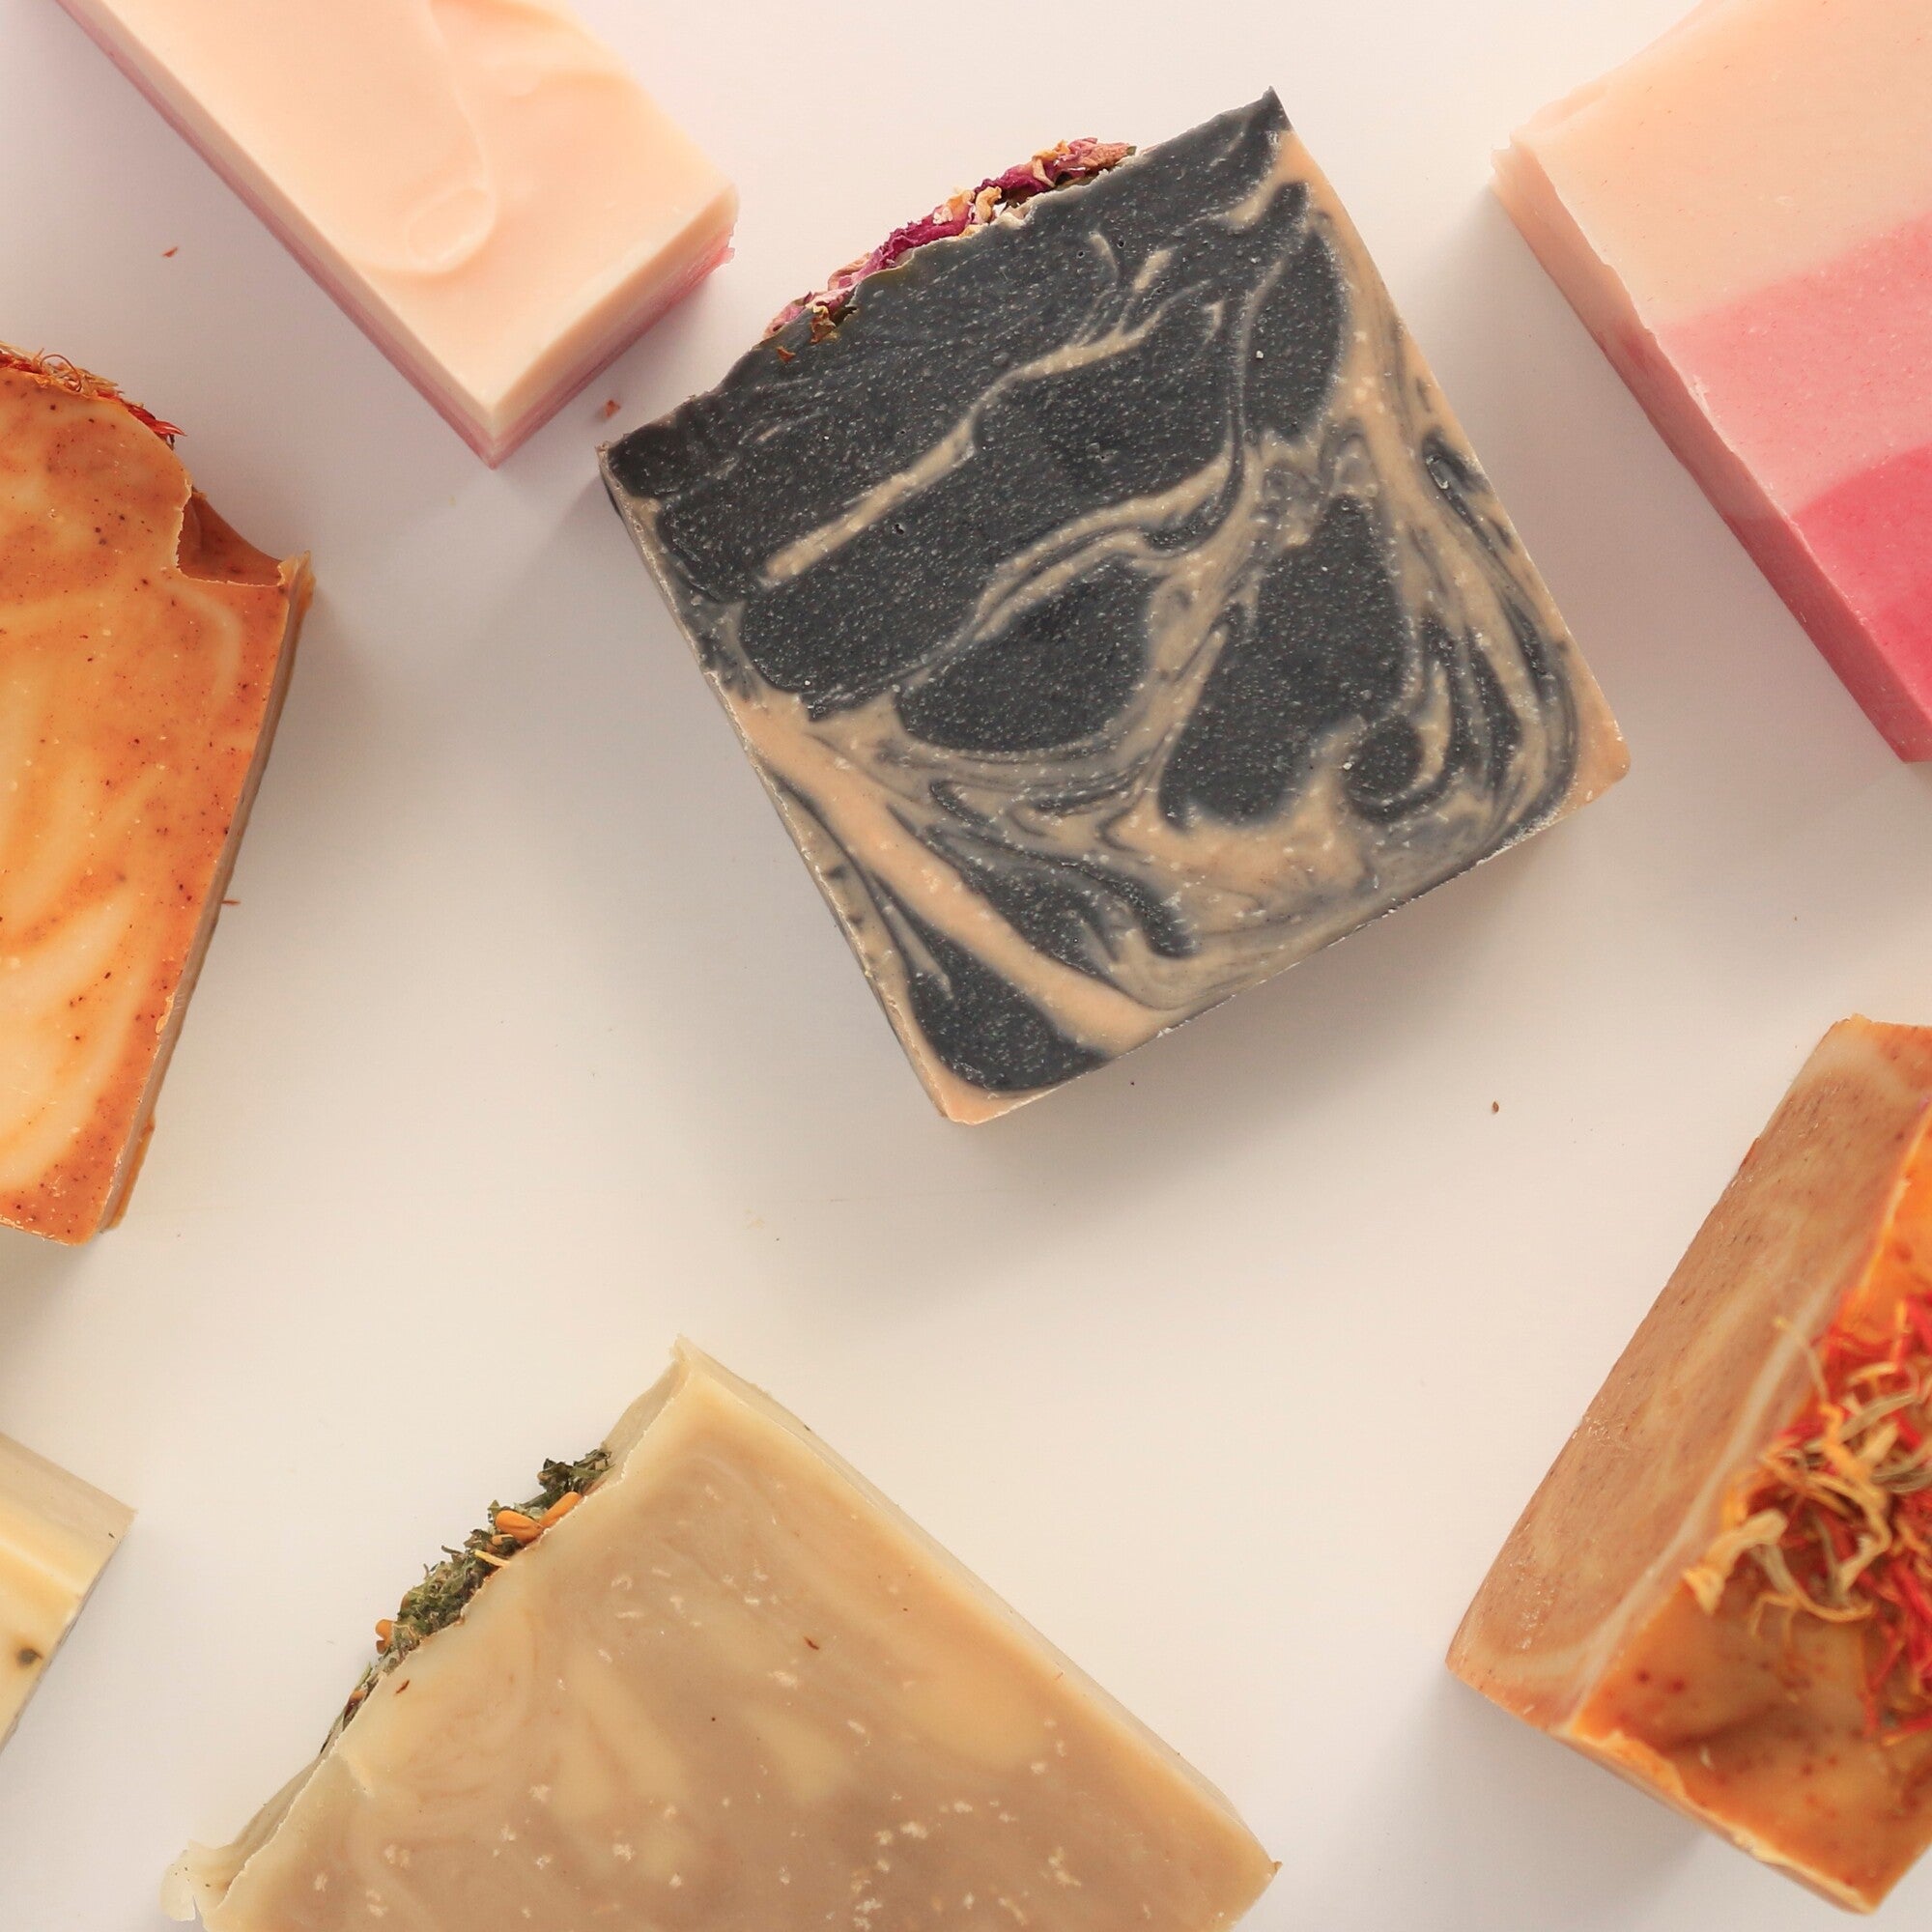 What's natural soap benefits?